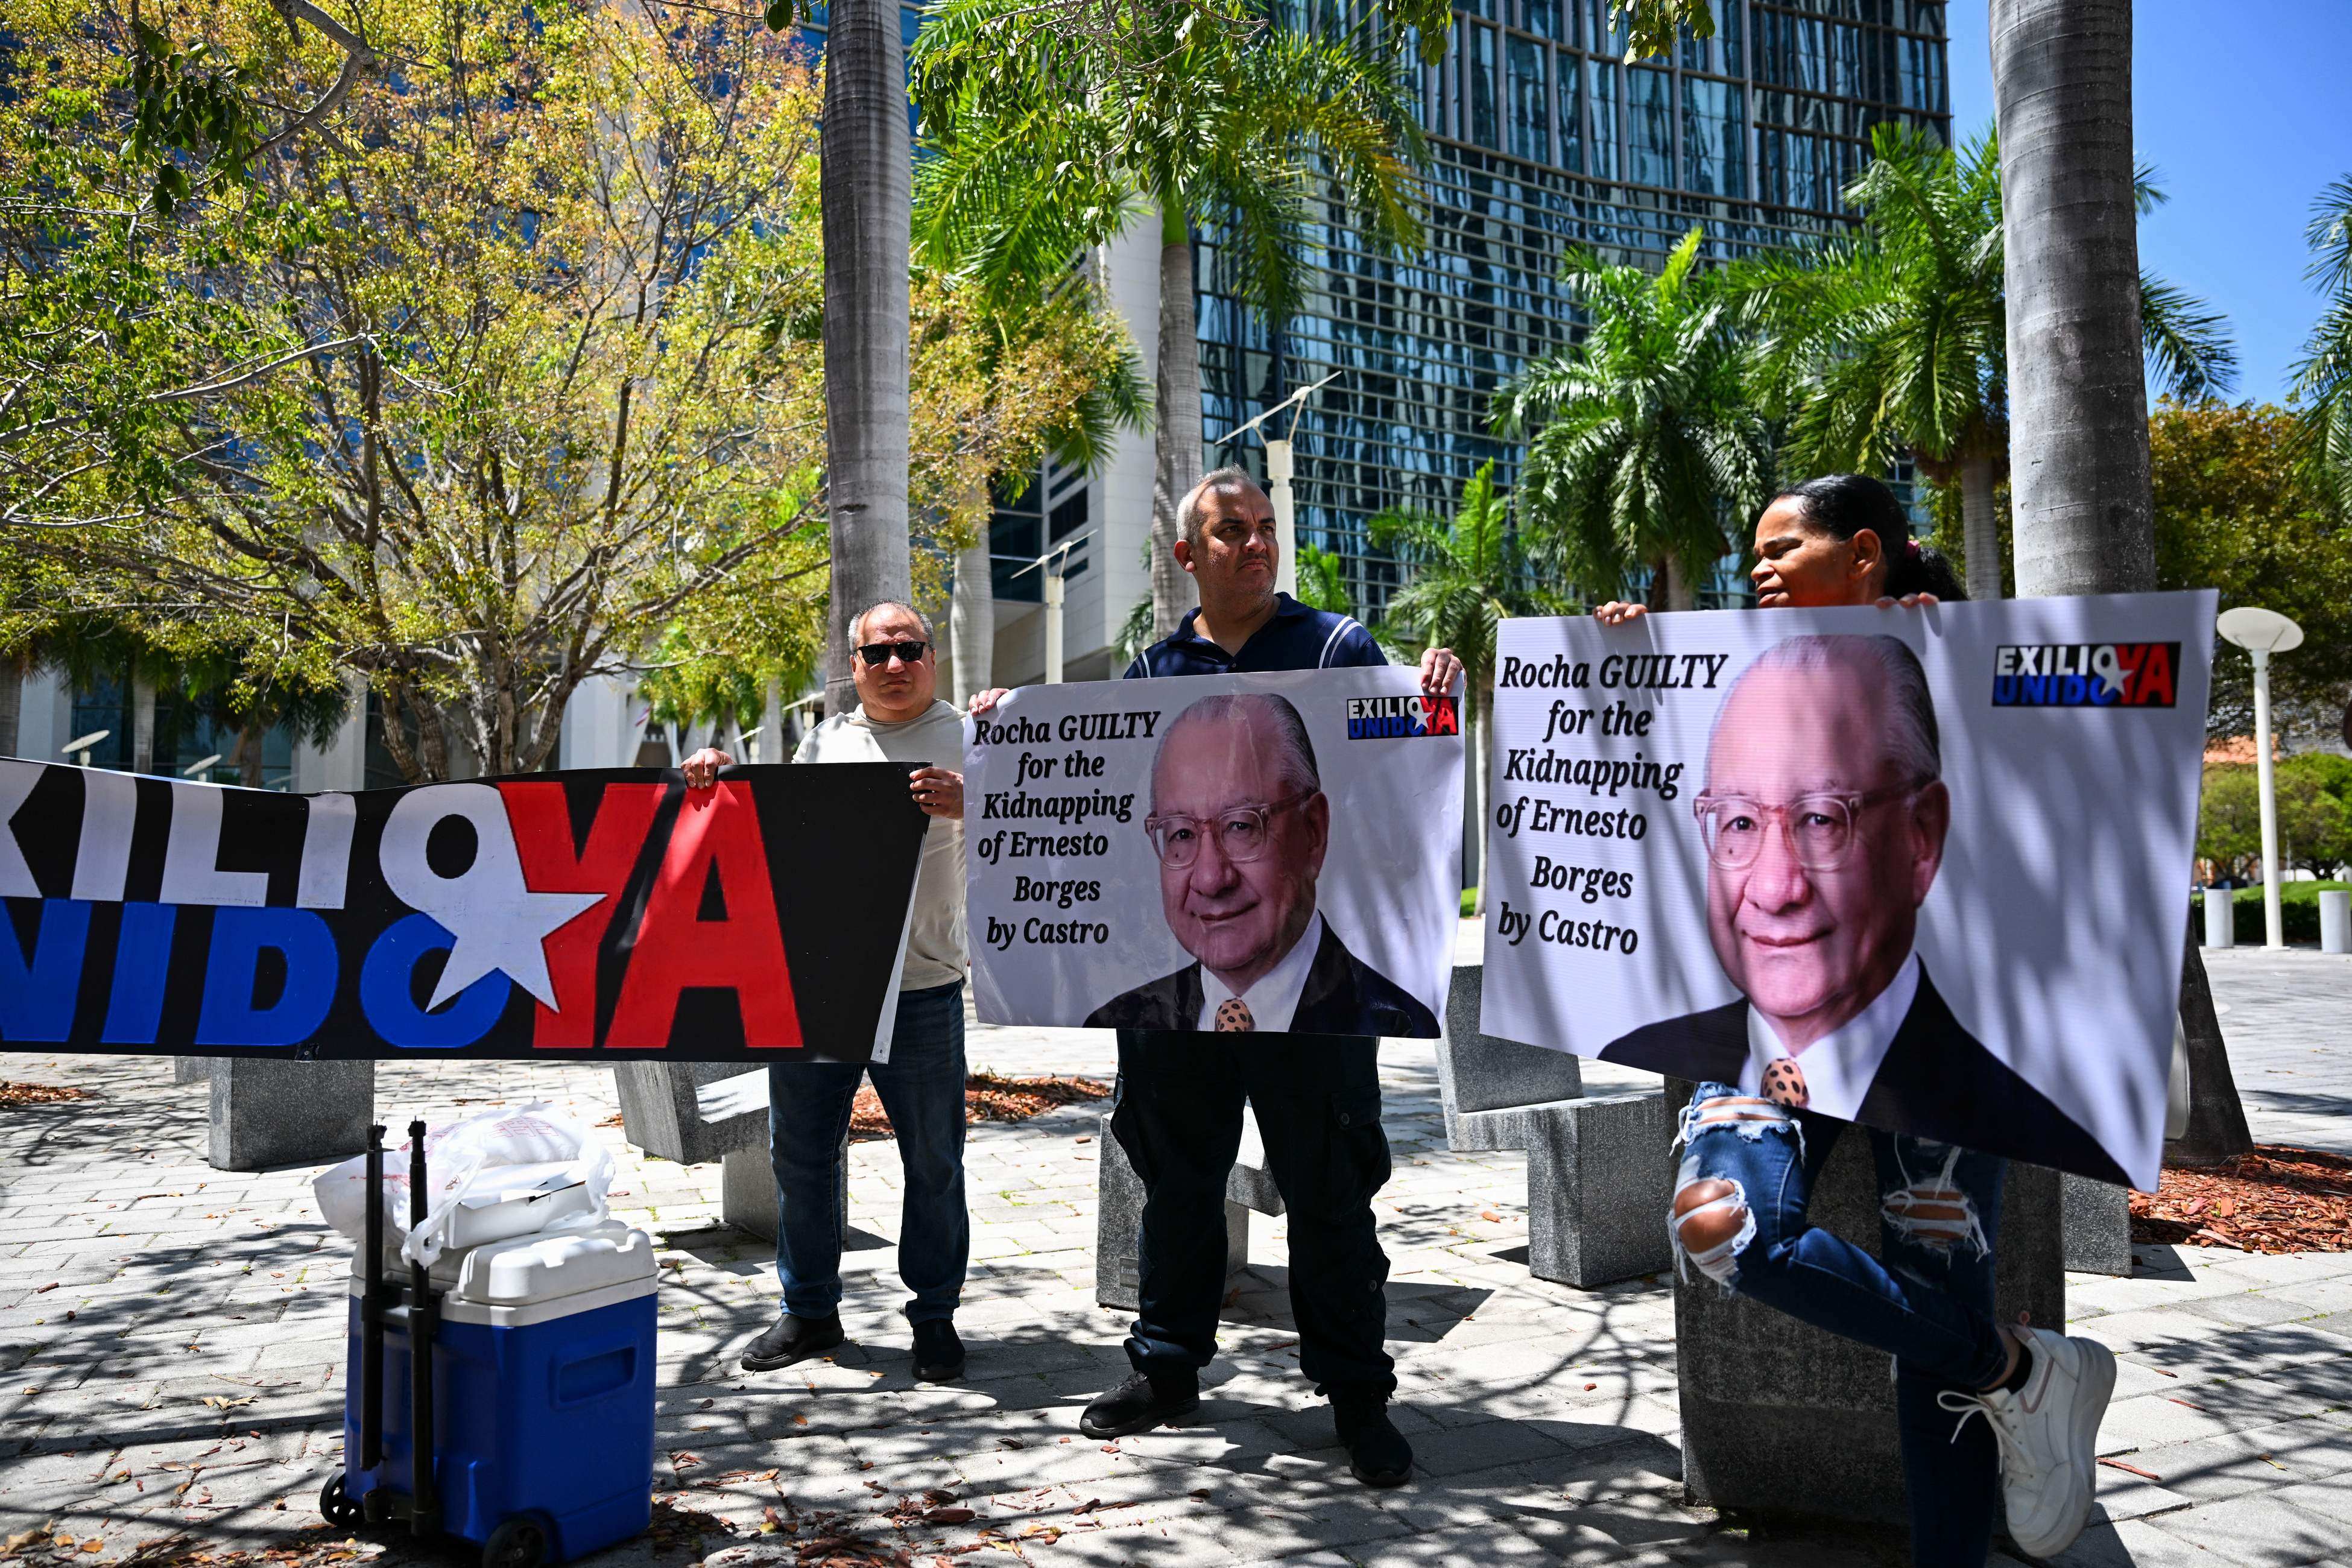 People protest demanding the “maximum sentence” for former US diplomat Victor Manuel Rocha outside a courthouse in Miami, Florida, on April 12. Photo: AFP